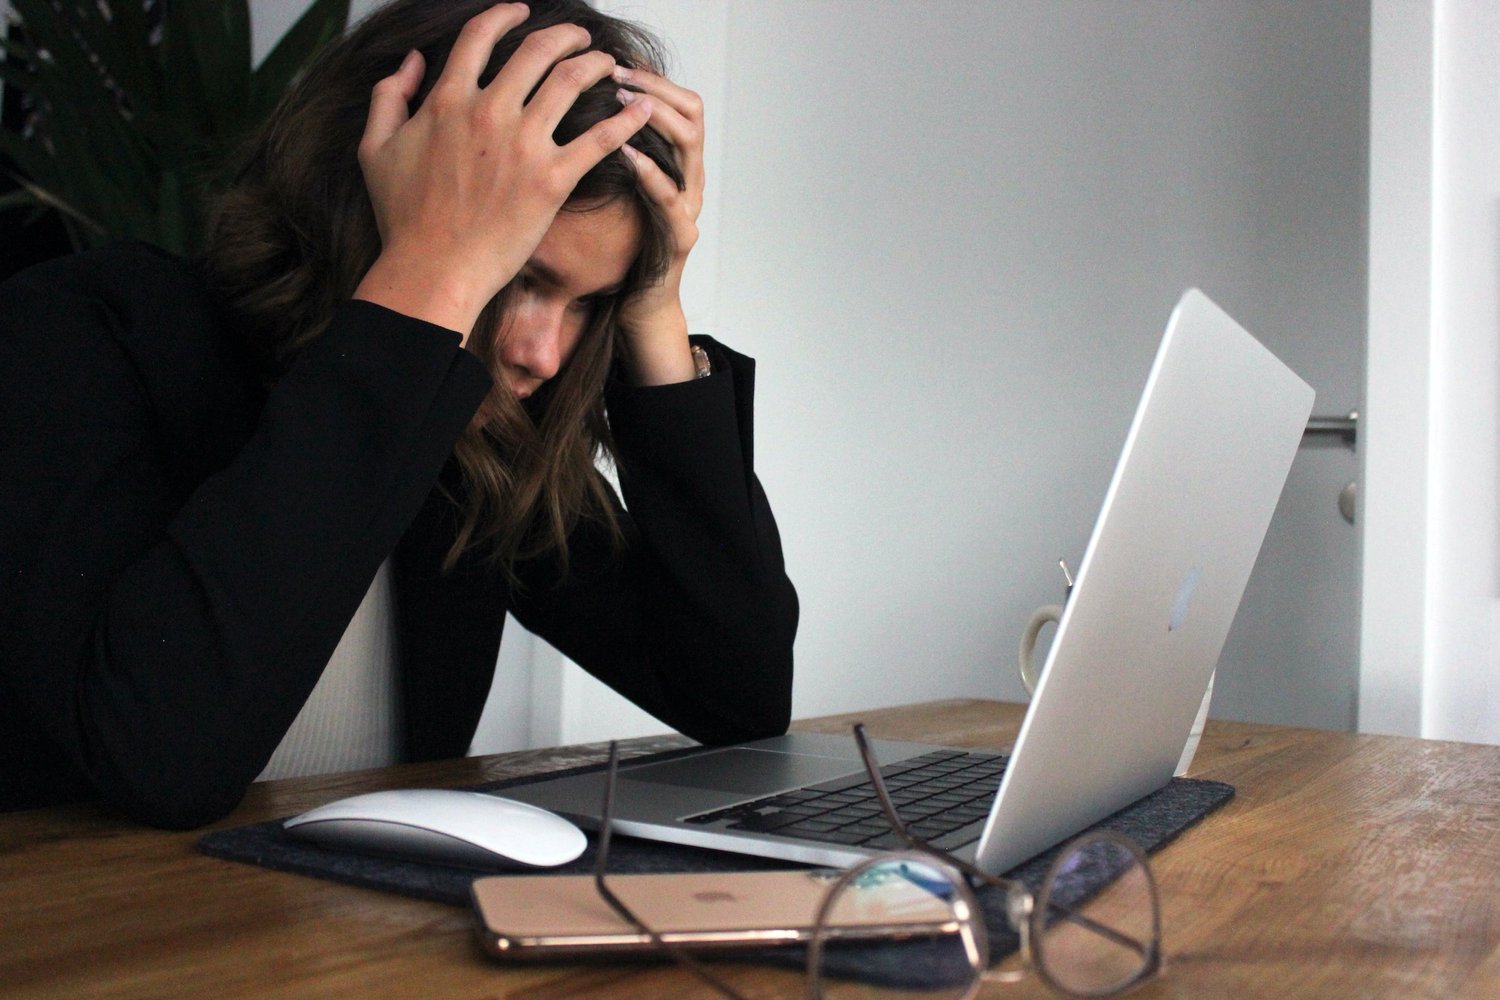 Distressed young woman in front of her computer at a cluttered desk, reflecting stress and work overload